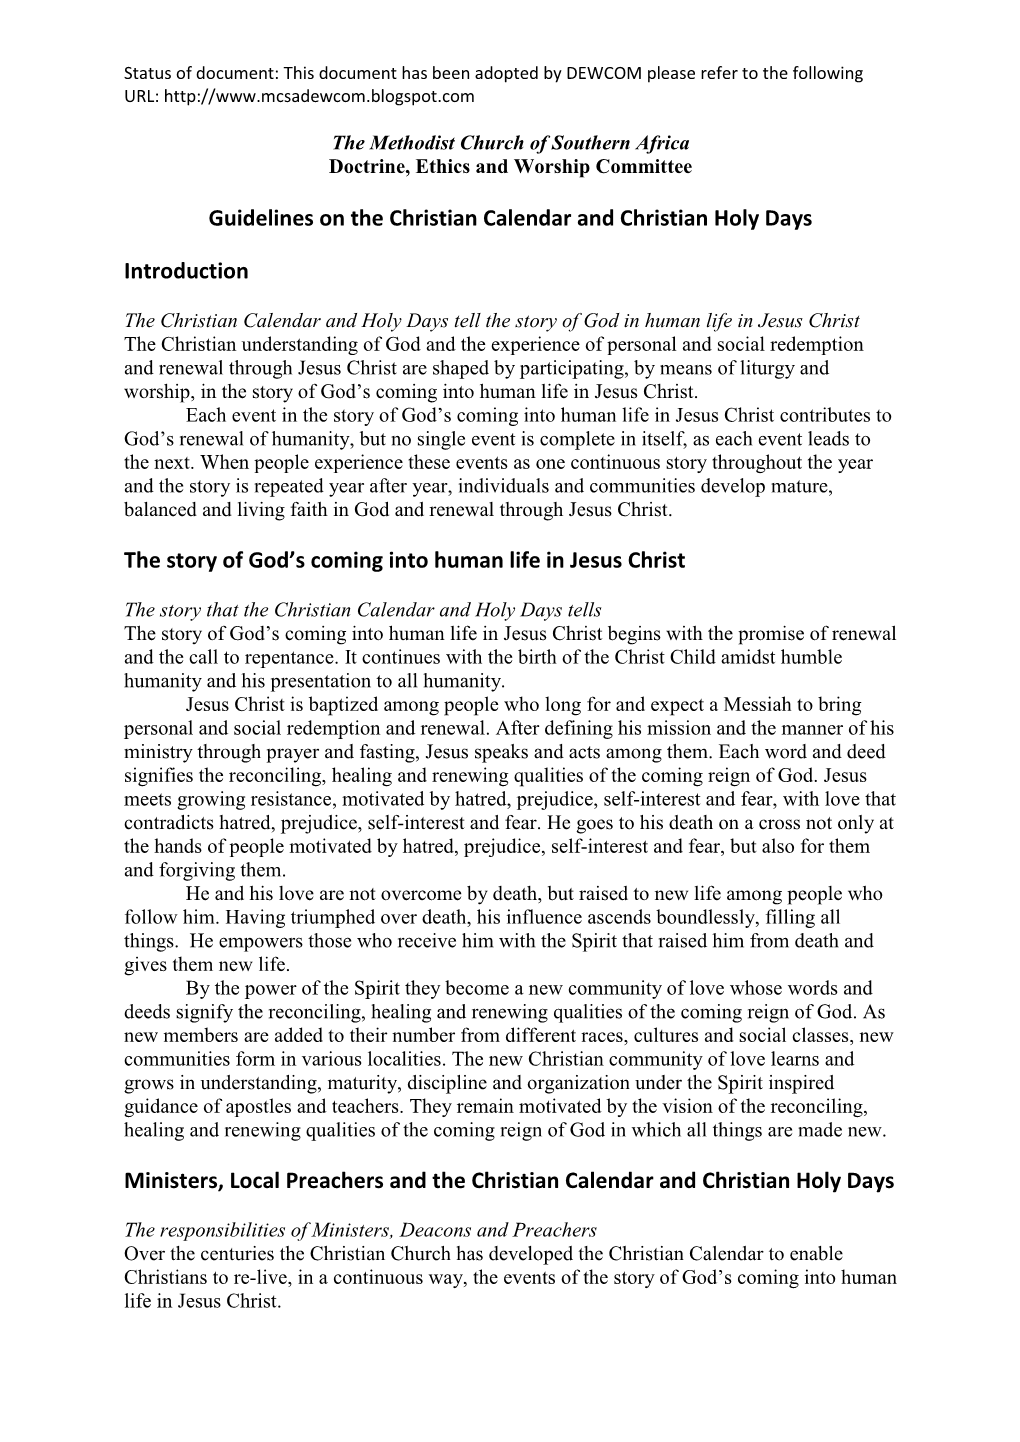 Guidelines on the Christian Calendar and Christian Holy Days